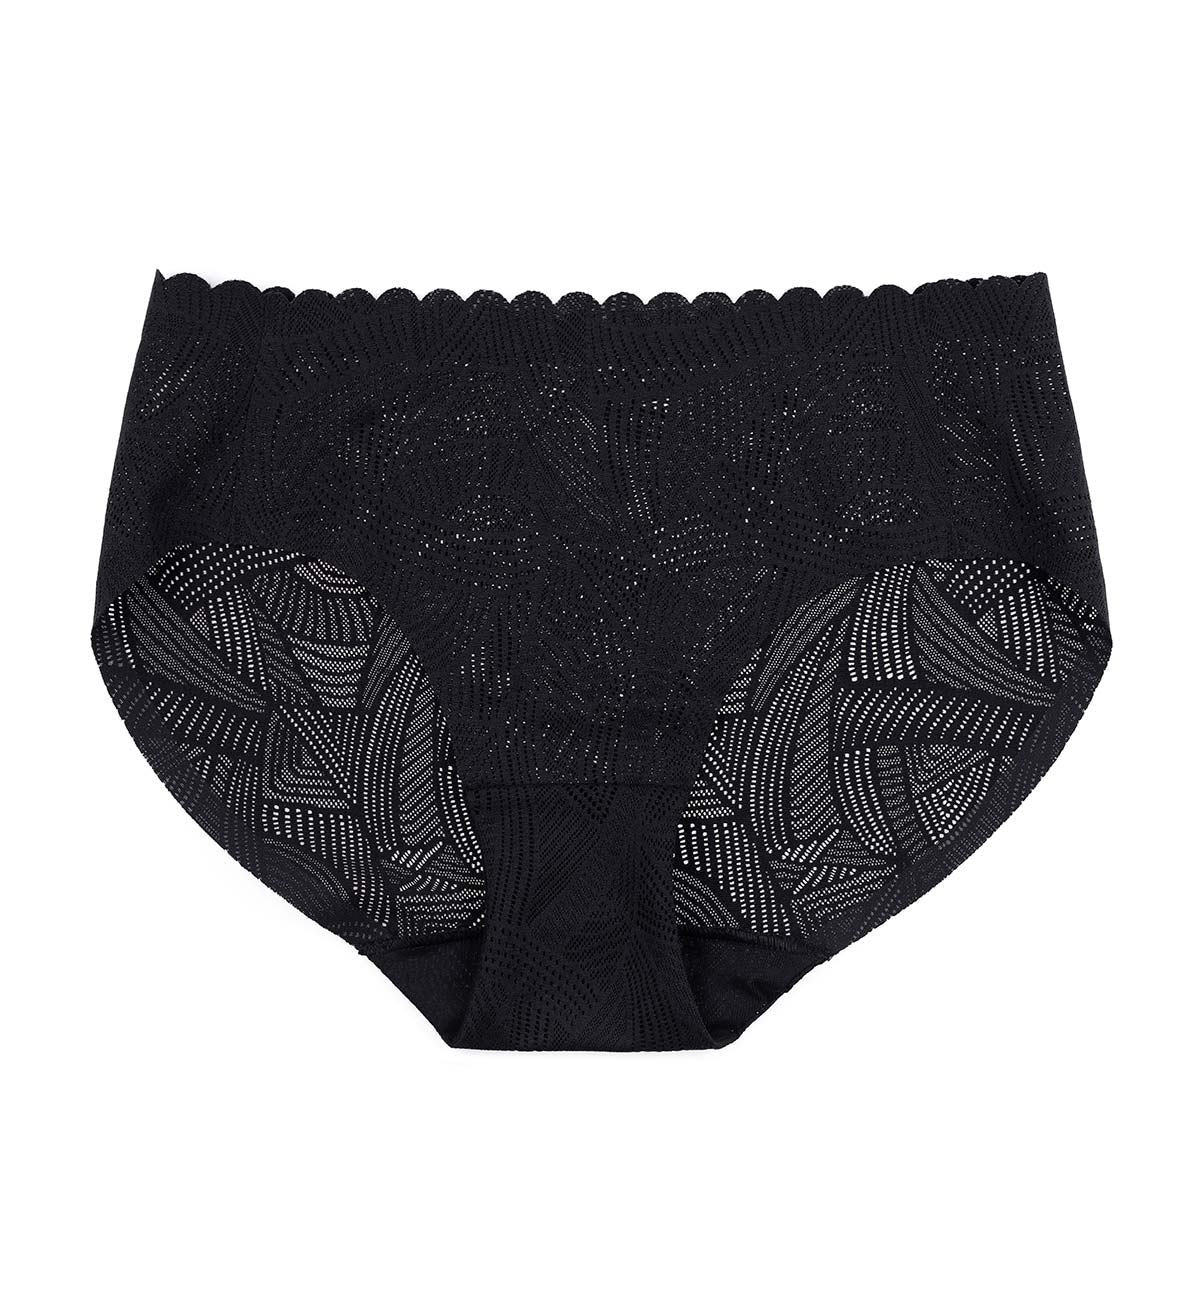 All Lace Hipster Black